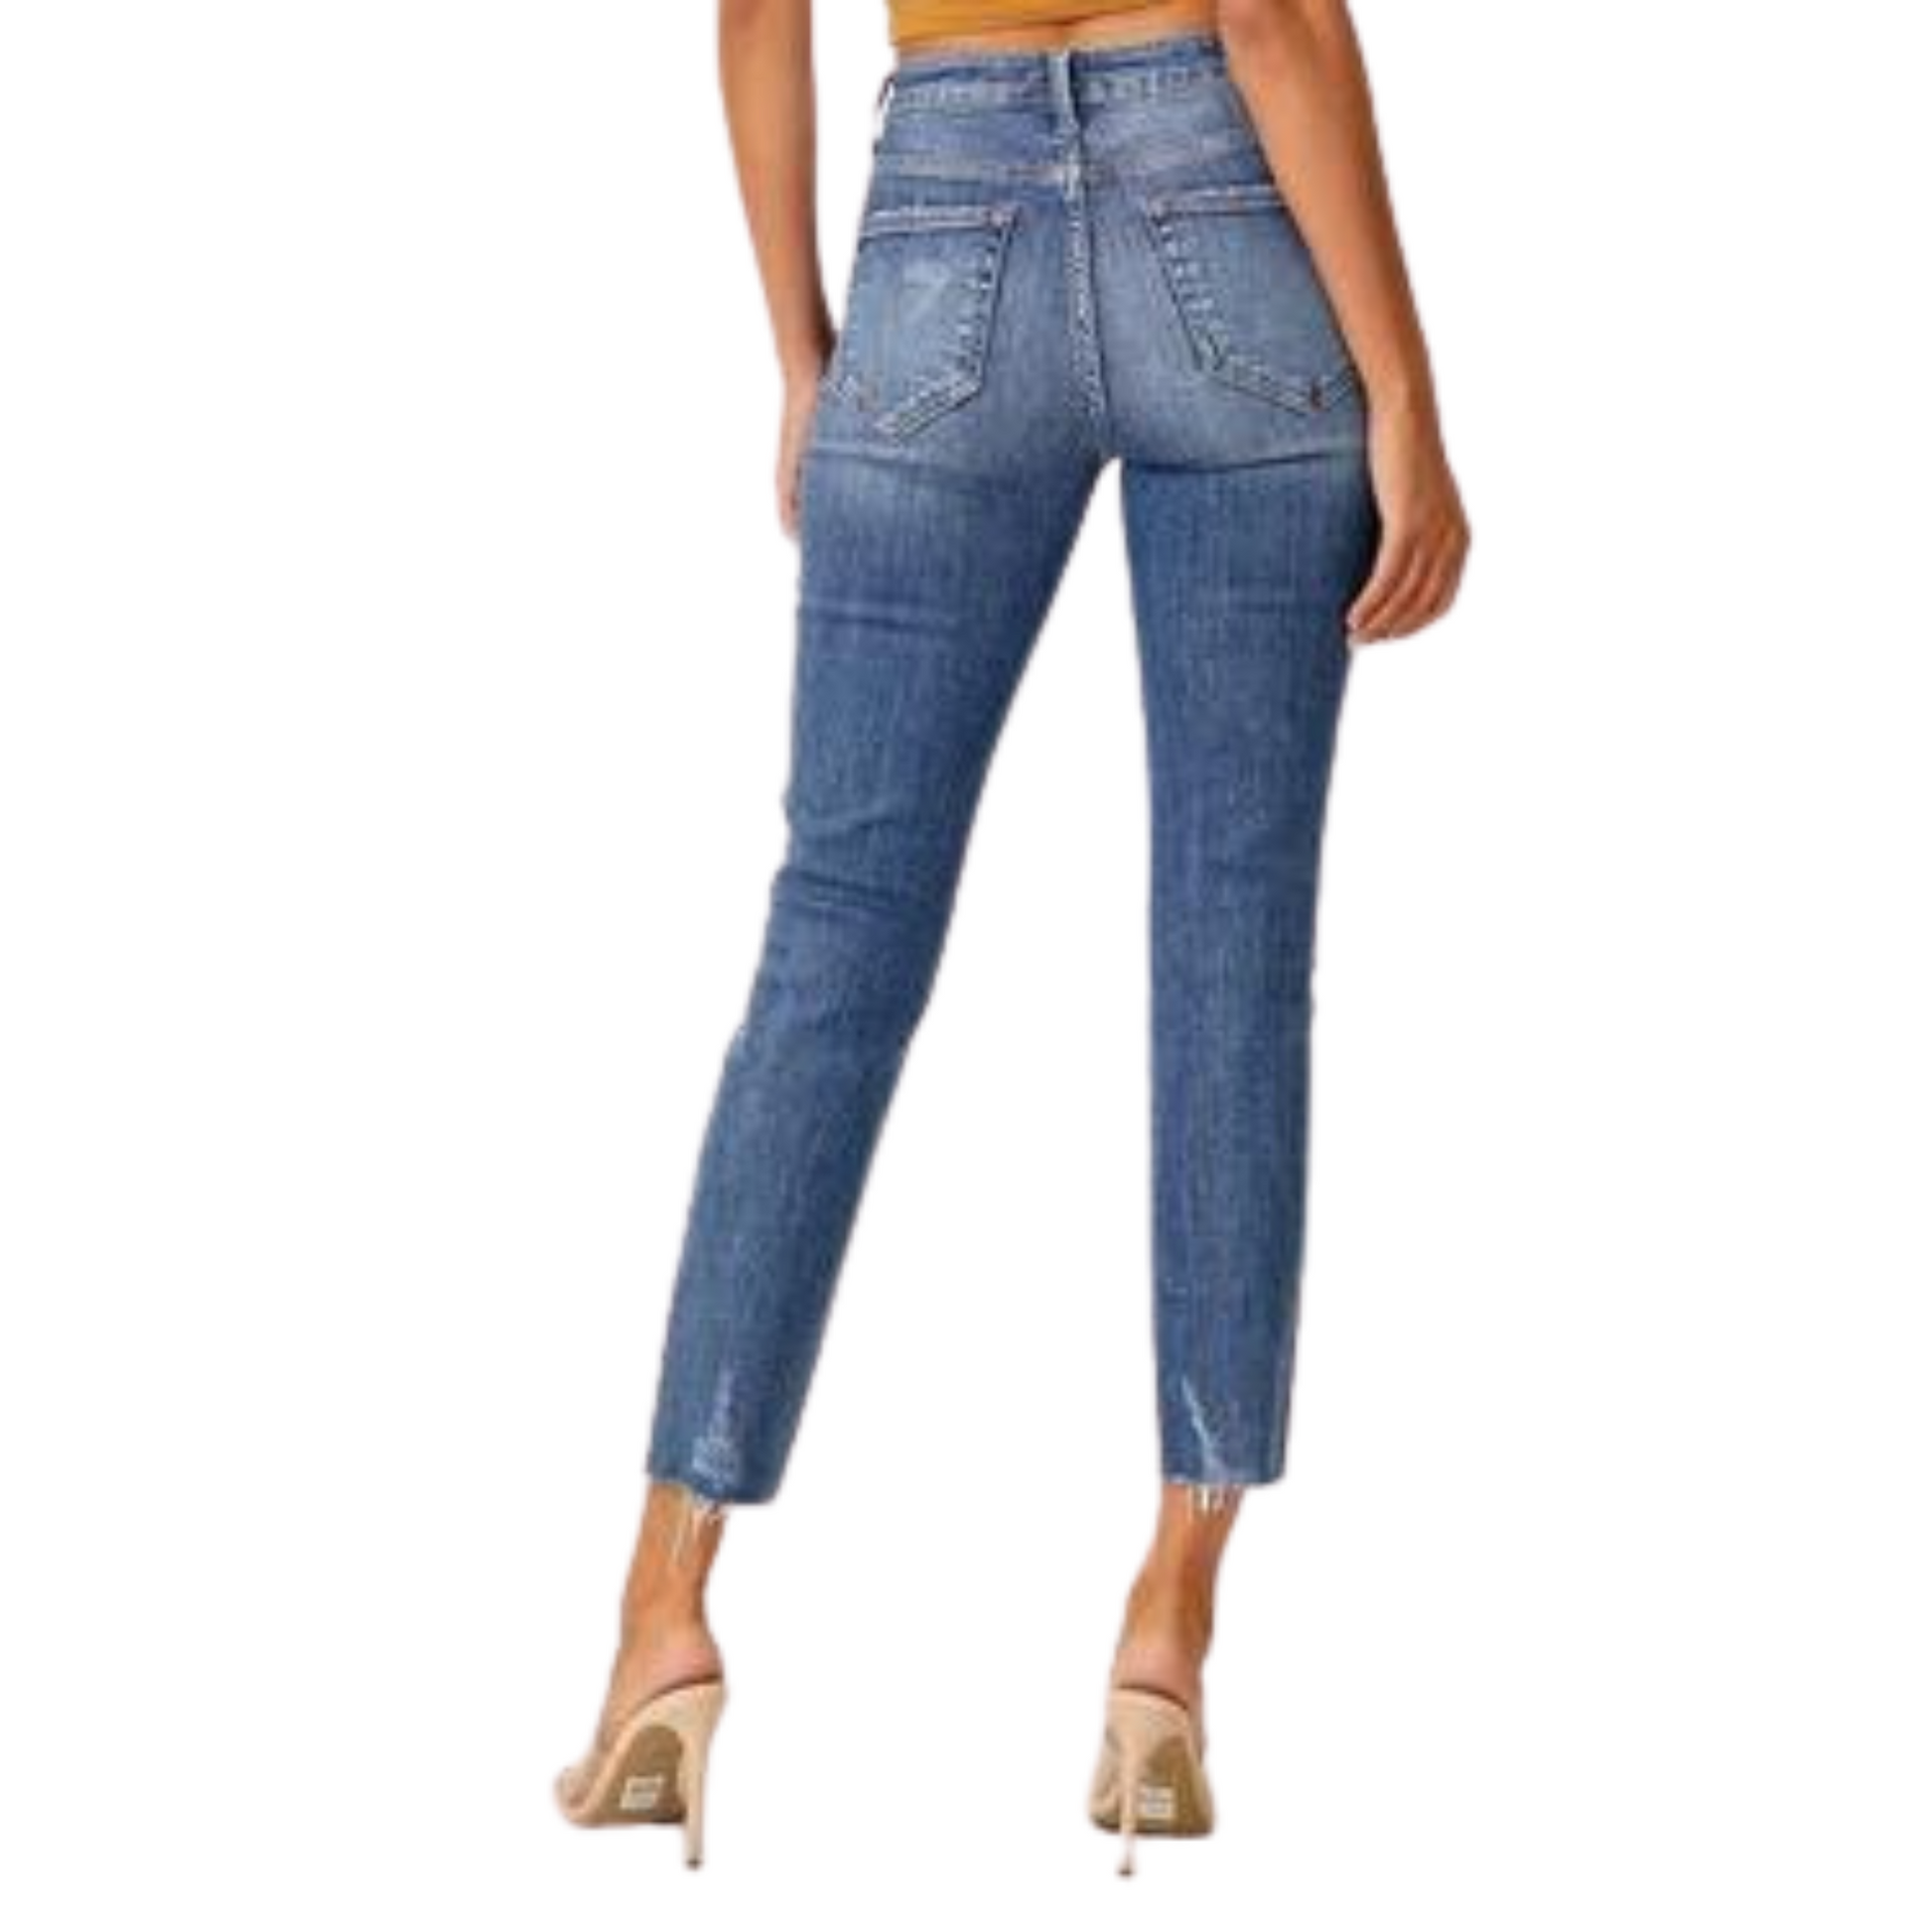 Expertly crafted from quality denim, these Mid Rise Button Fly jeans offer a relaxed fit with a flattering mid rise waist. The medium wash adds a touch of vintage charm while the classic button fly adds a trendy twist. Perfect for any occasion, these skinny jeans are a must-have for any stylish wardrobe.